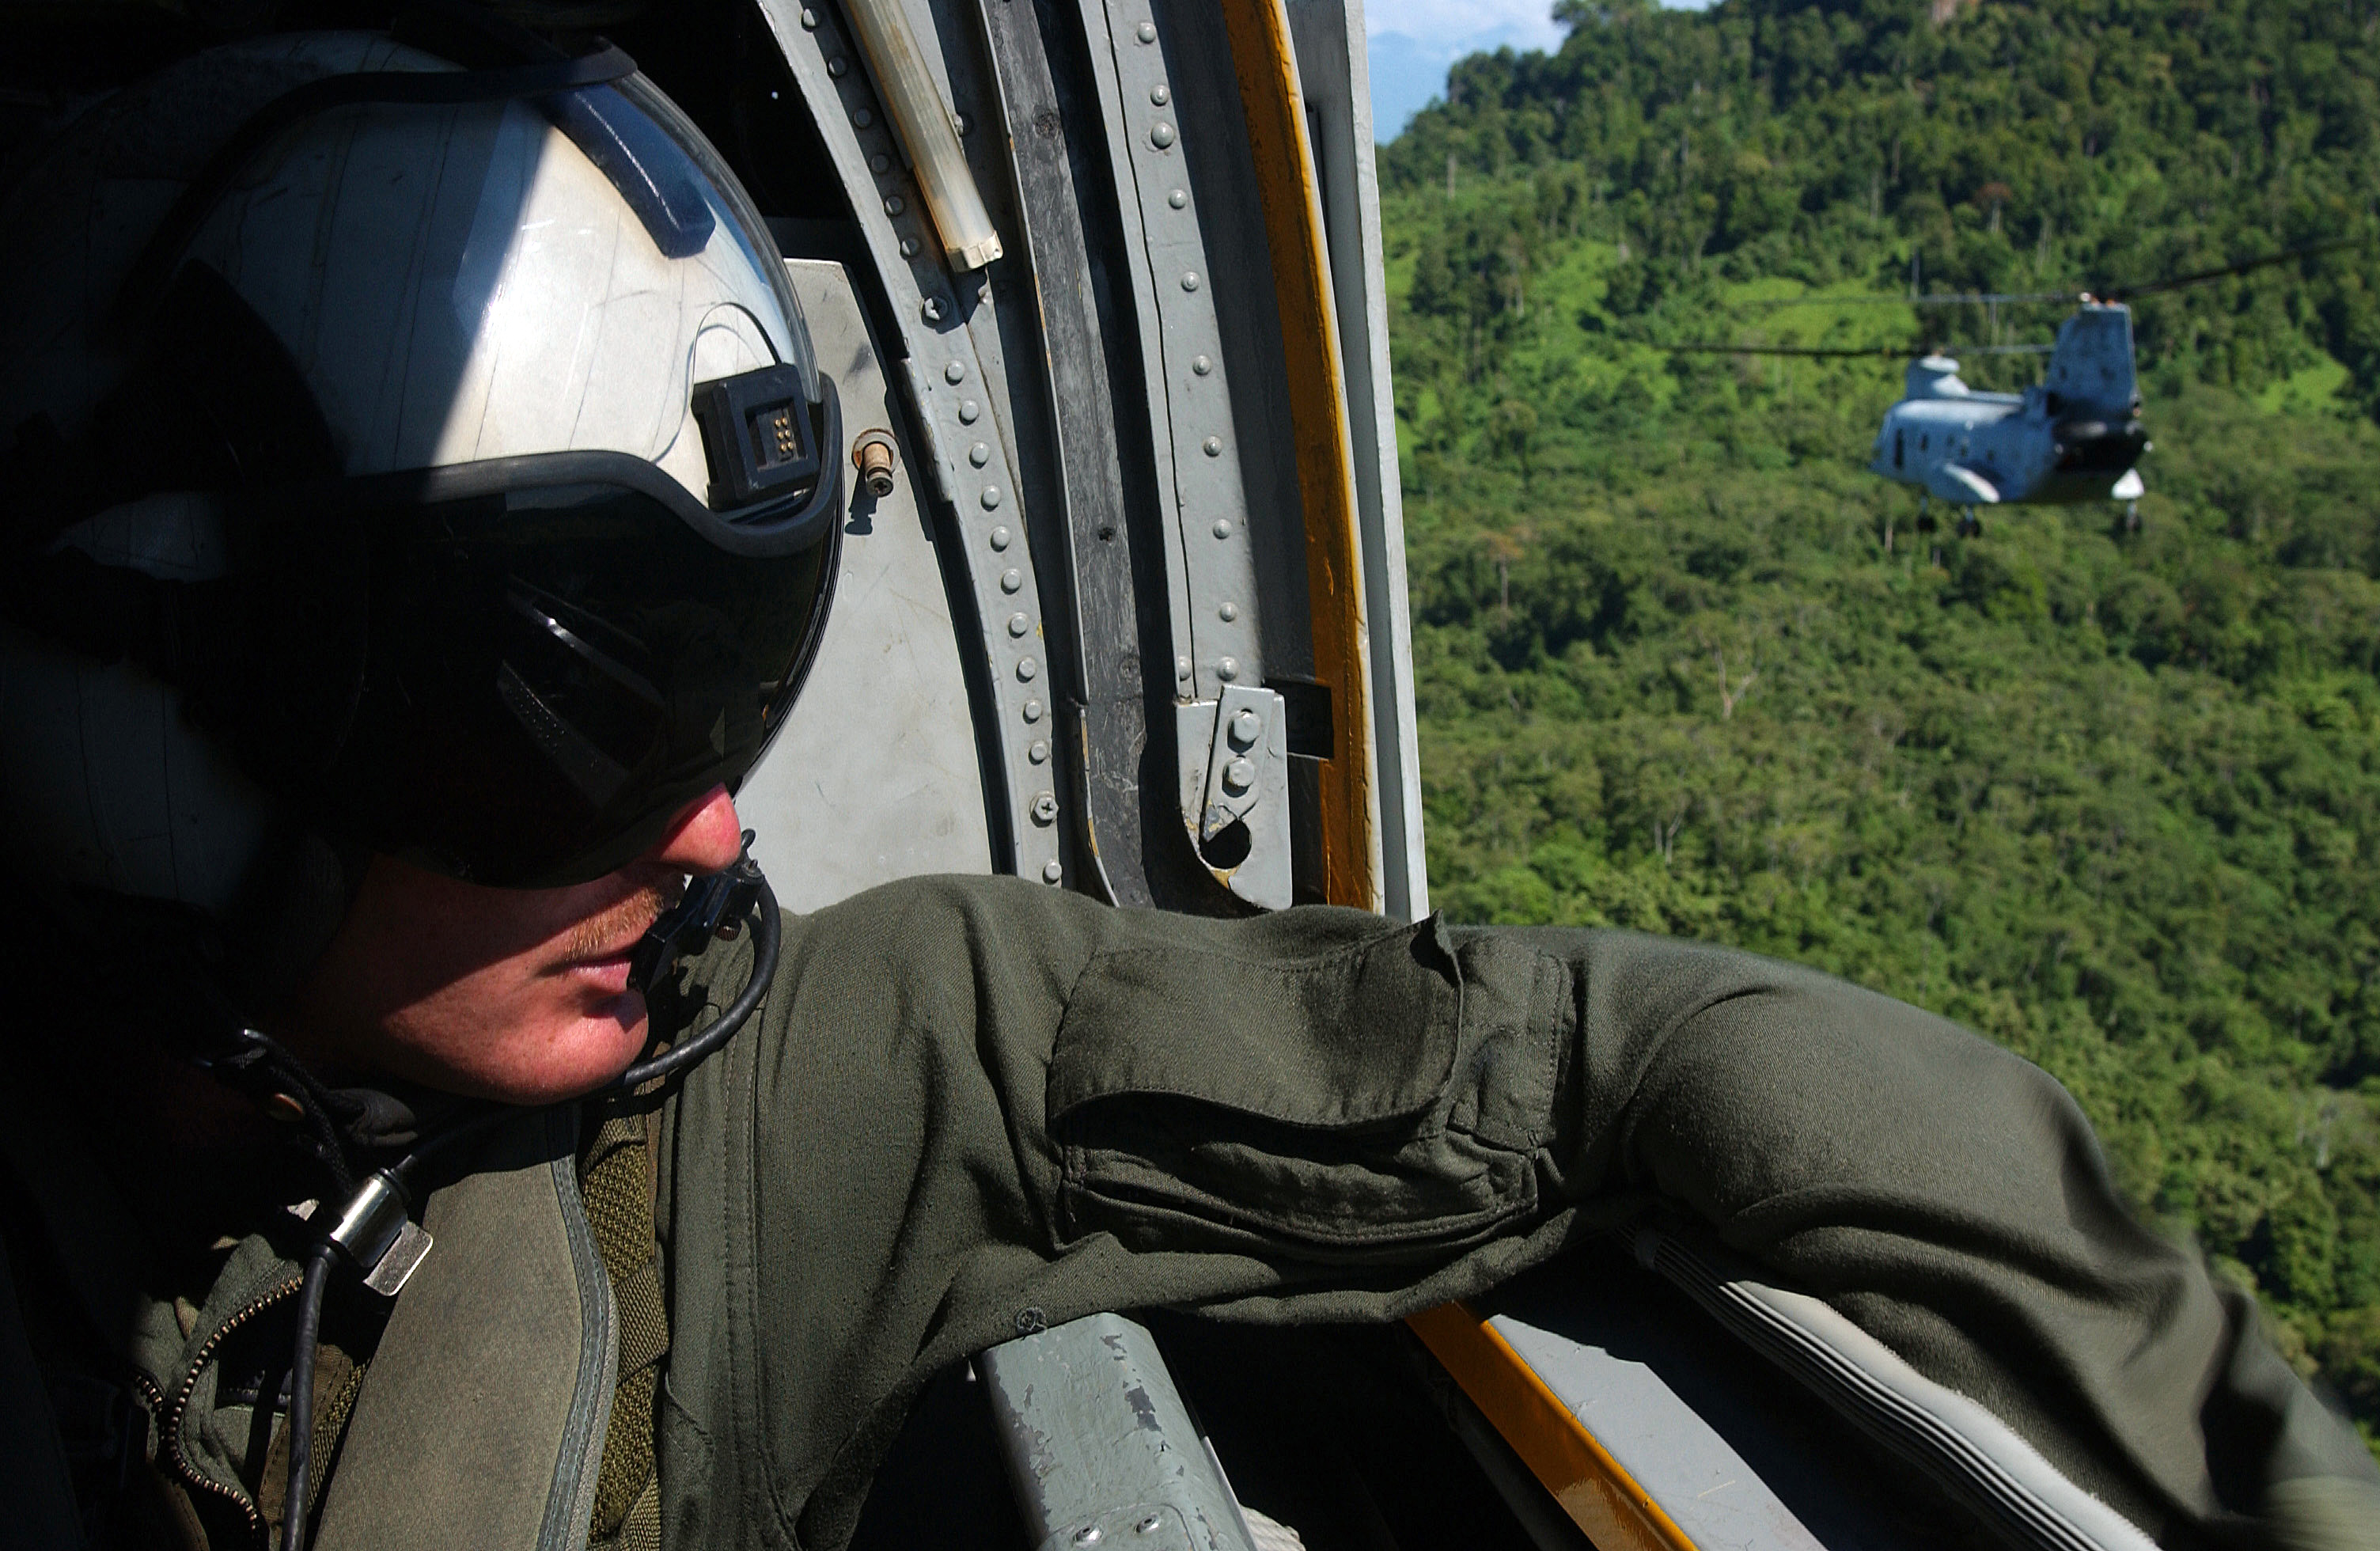 US_Navy_050116-F-4884R-031_Marine_Corps_Sgt._Michael_Cates,_a_CH-46E_Sea_Knight_helicopter_Crew_Chief,_watches_for_other_aircraft_and_high_obstacles_following_a_humanitarian_aid_mission.jpg